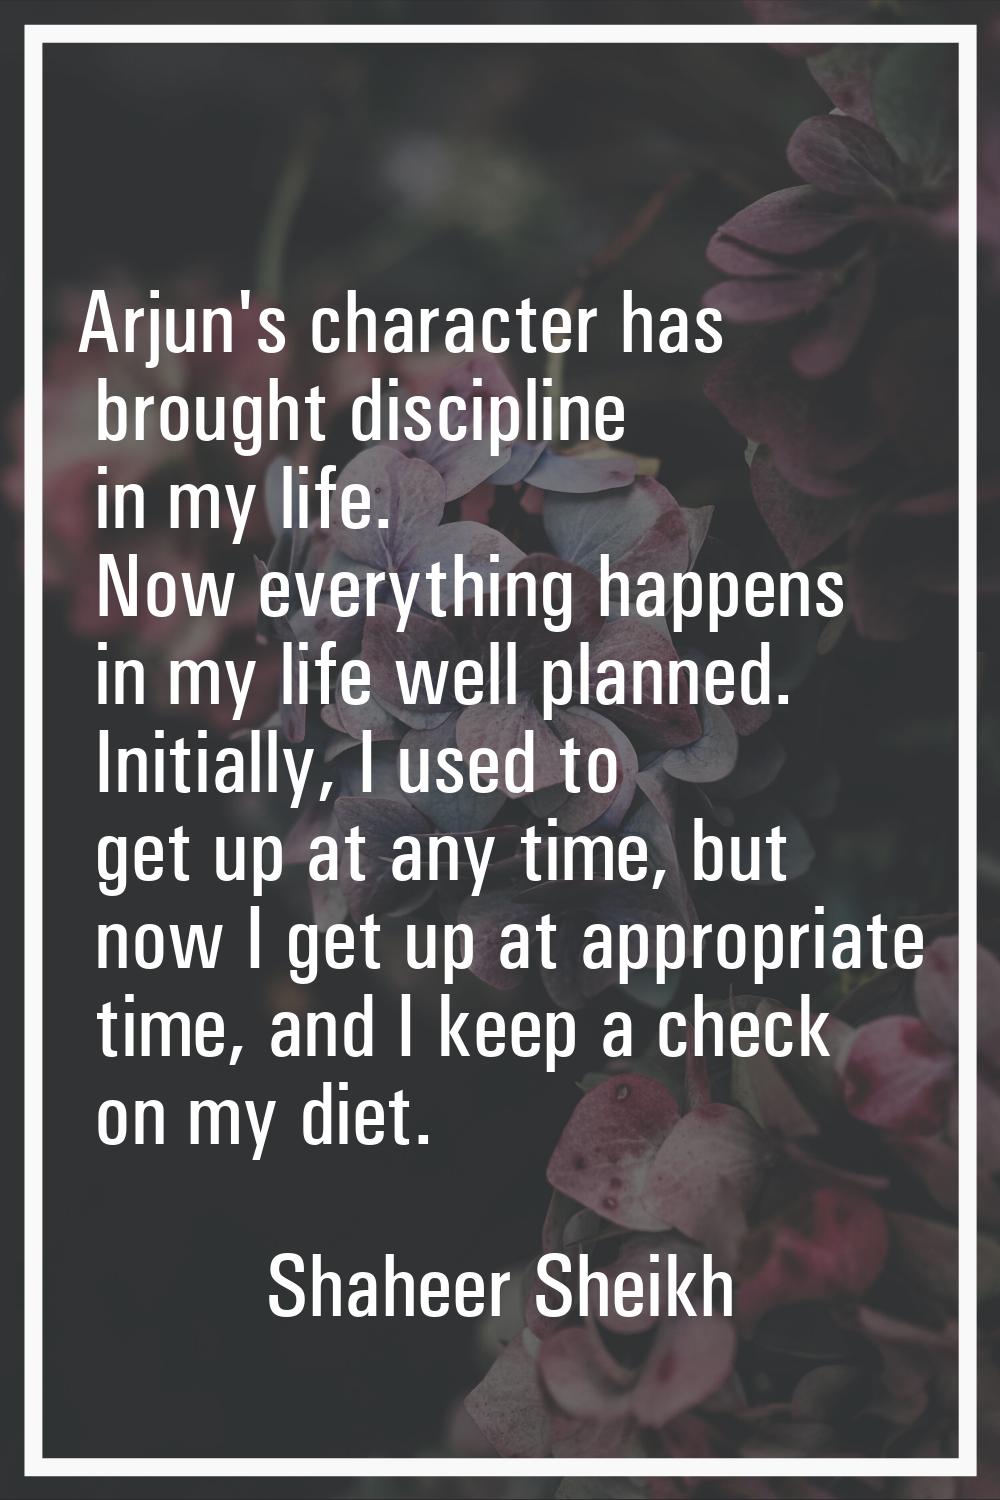 Arjun's character has brought discipline in my life. Now everything happens in my life well planned